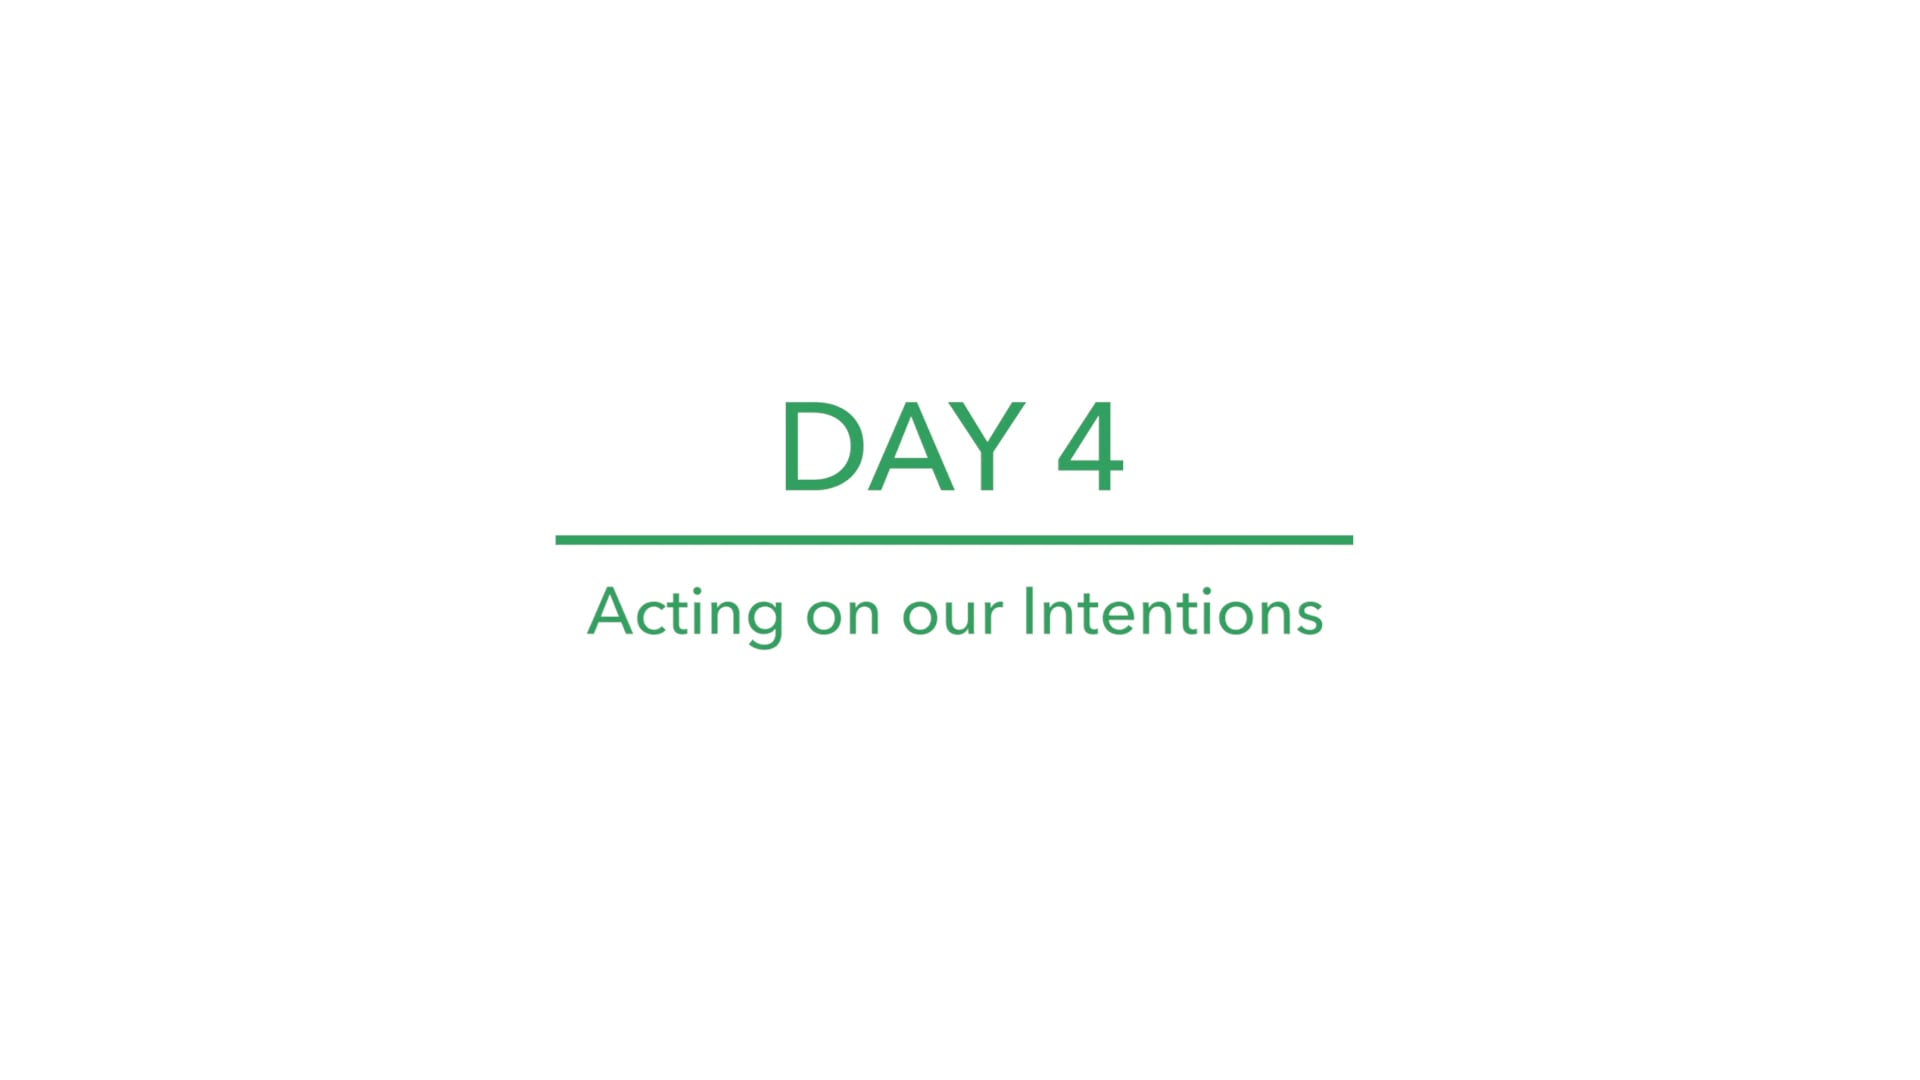 Day 4: Acting on our Intentions